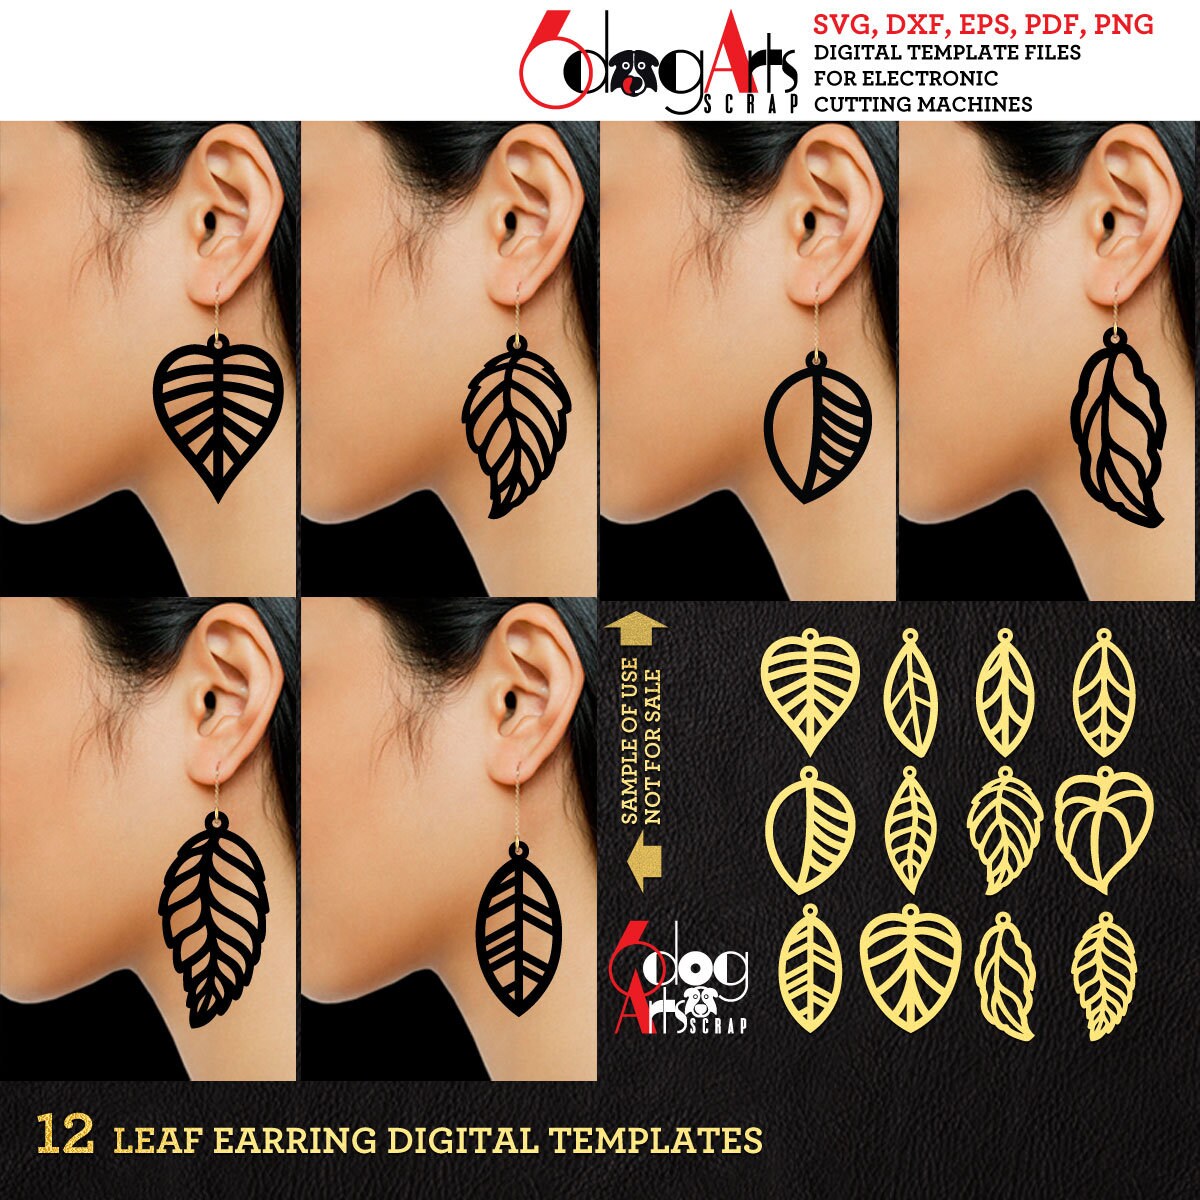 Stacked Earrings SVG Cut Files, DIY Earring templates: Diamond, Tear Drop,  Flame and Leaf Earrings svg with holes